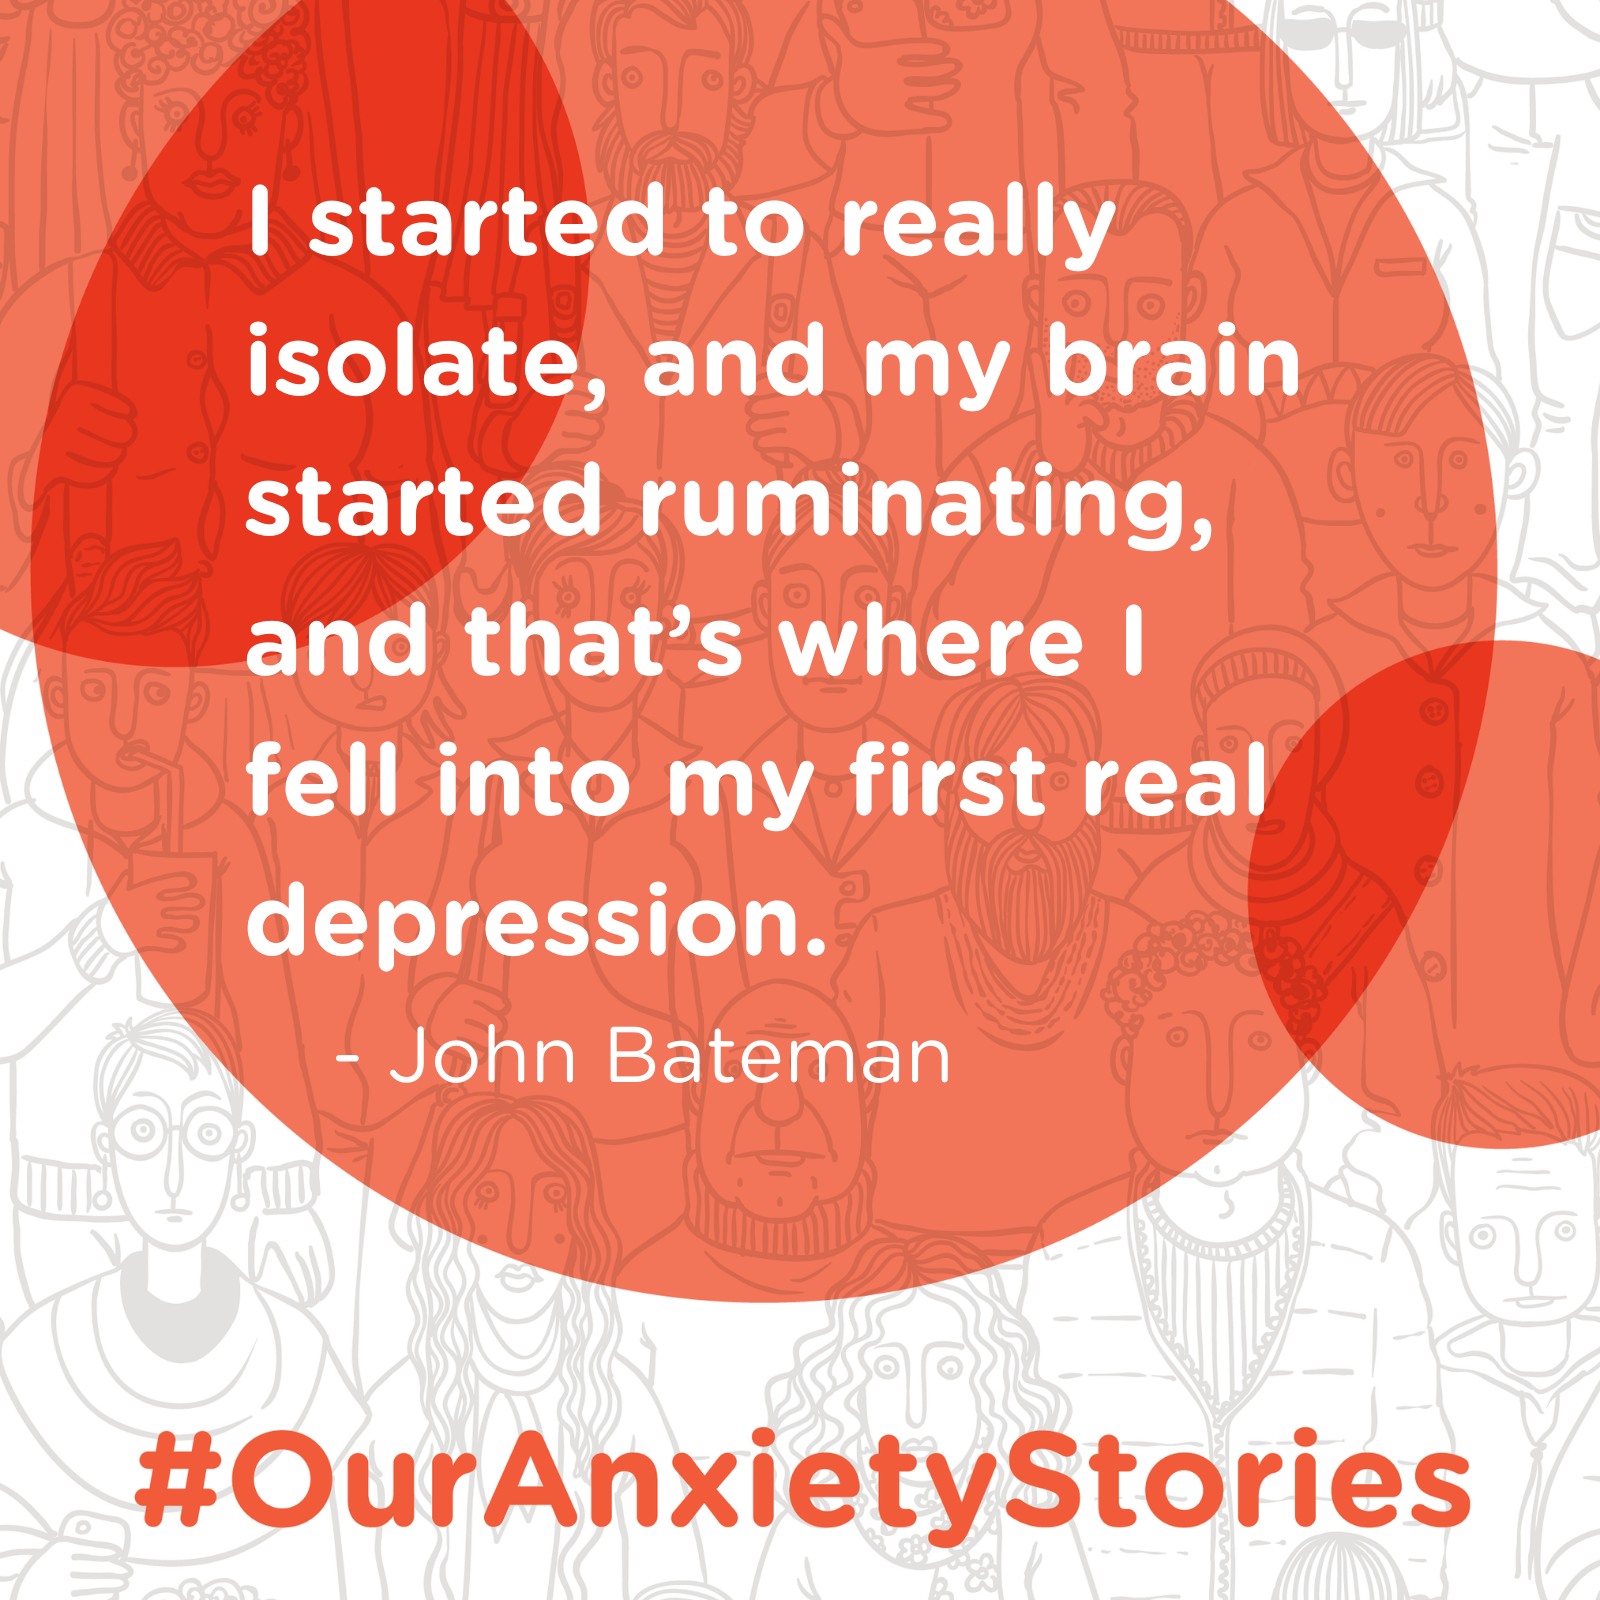 Putting the Host of #OurAnxietyStories John Bateman in the Hotseat